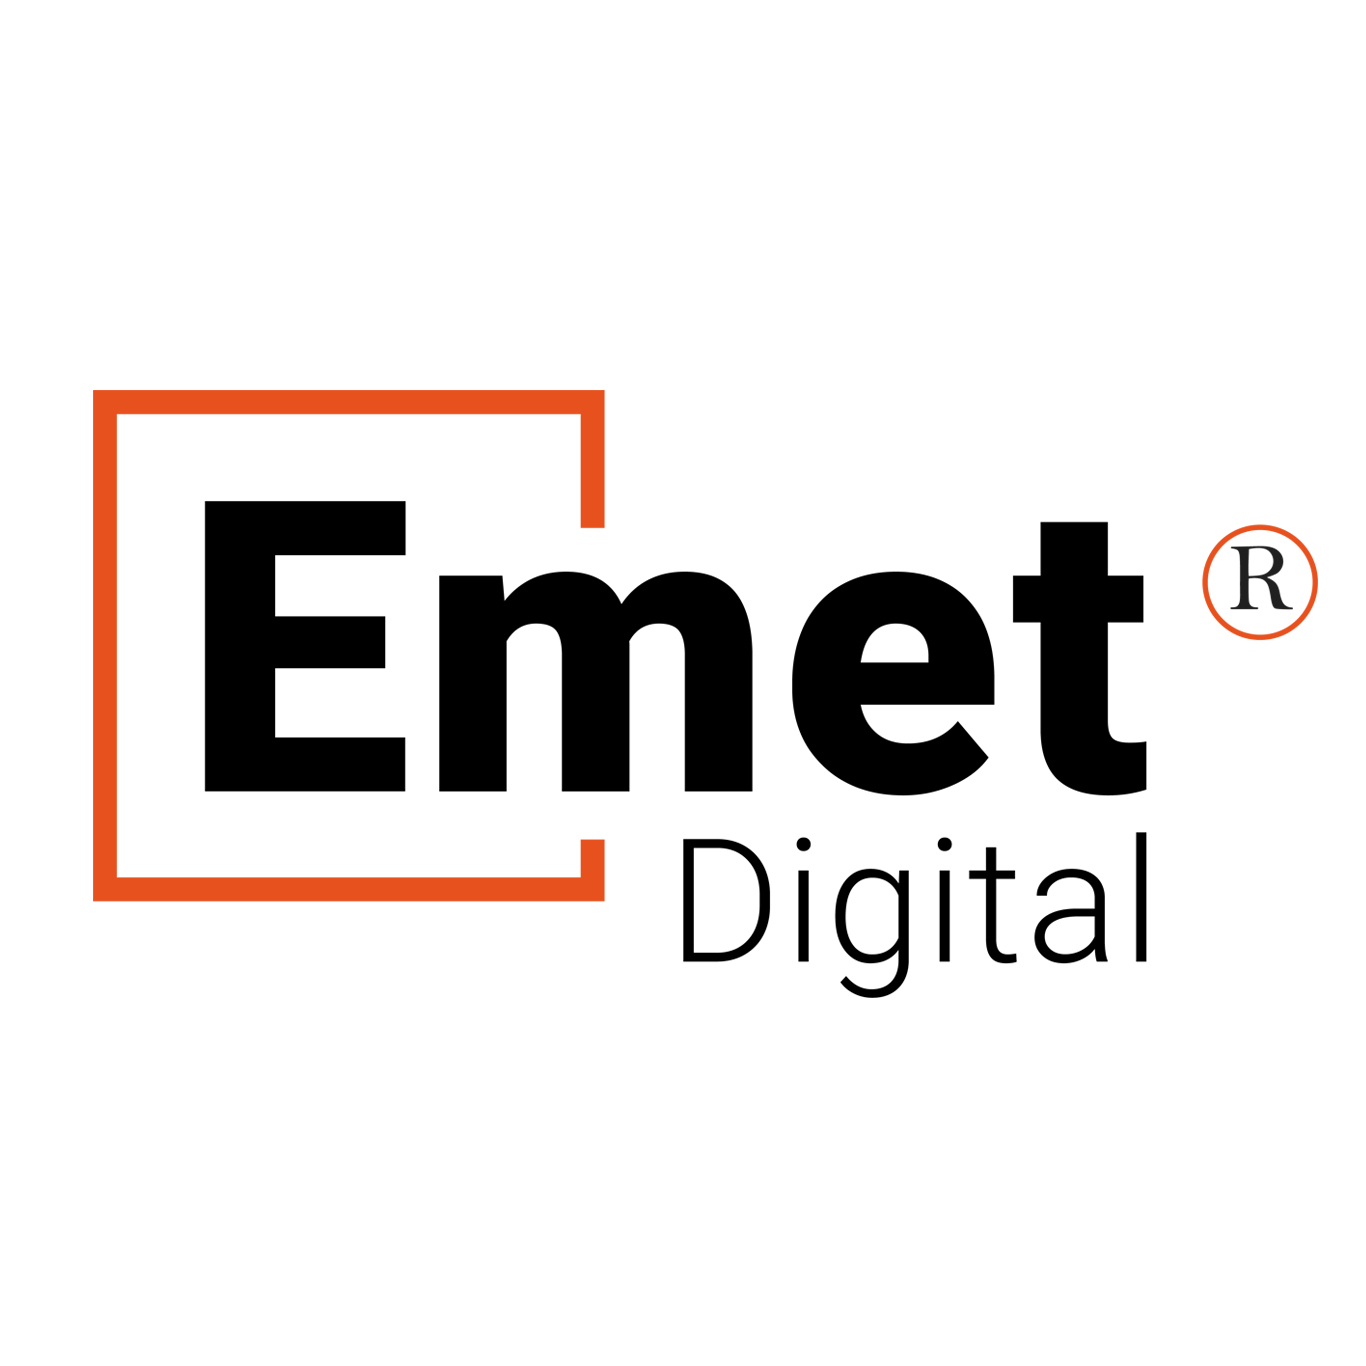 Emet Digital, A Leading Digital Marketing Agency Serving Long Beach, Secures Coveted Title as Yelp's Top Official Premier Partner